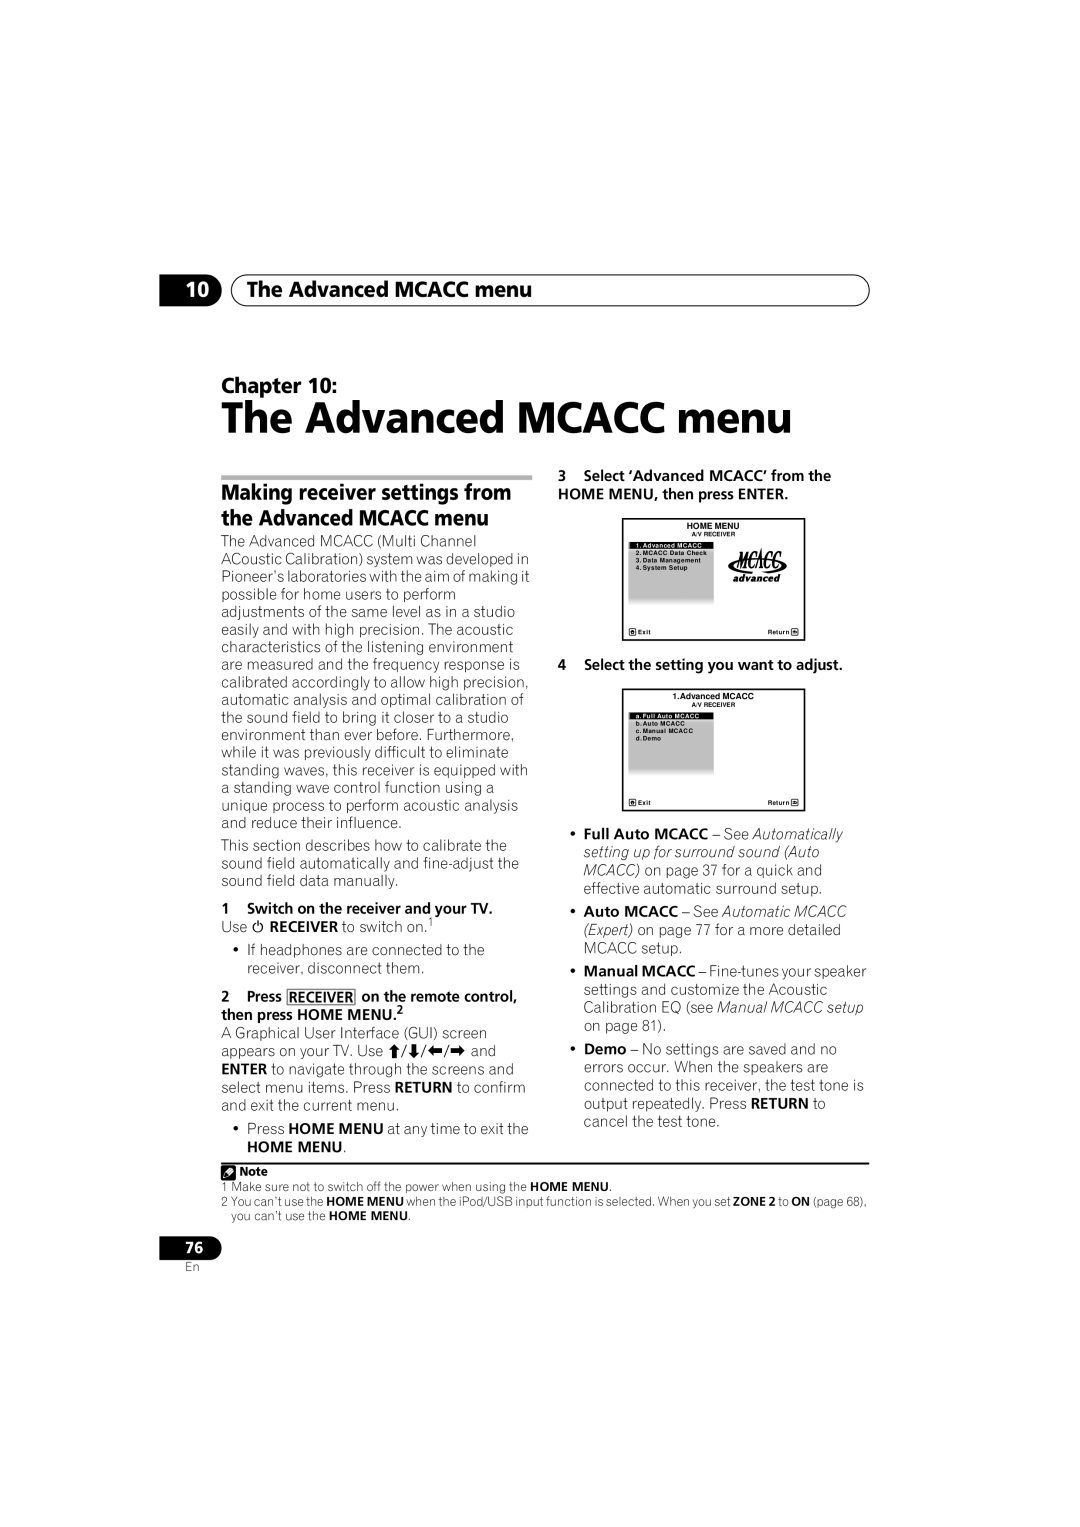 Pioneer VSX-919AH-S manual 10The Advanced MCACC menu Chapter, Home Menu, Select the setting you want to adjust 